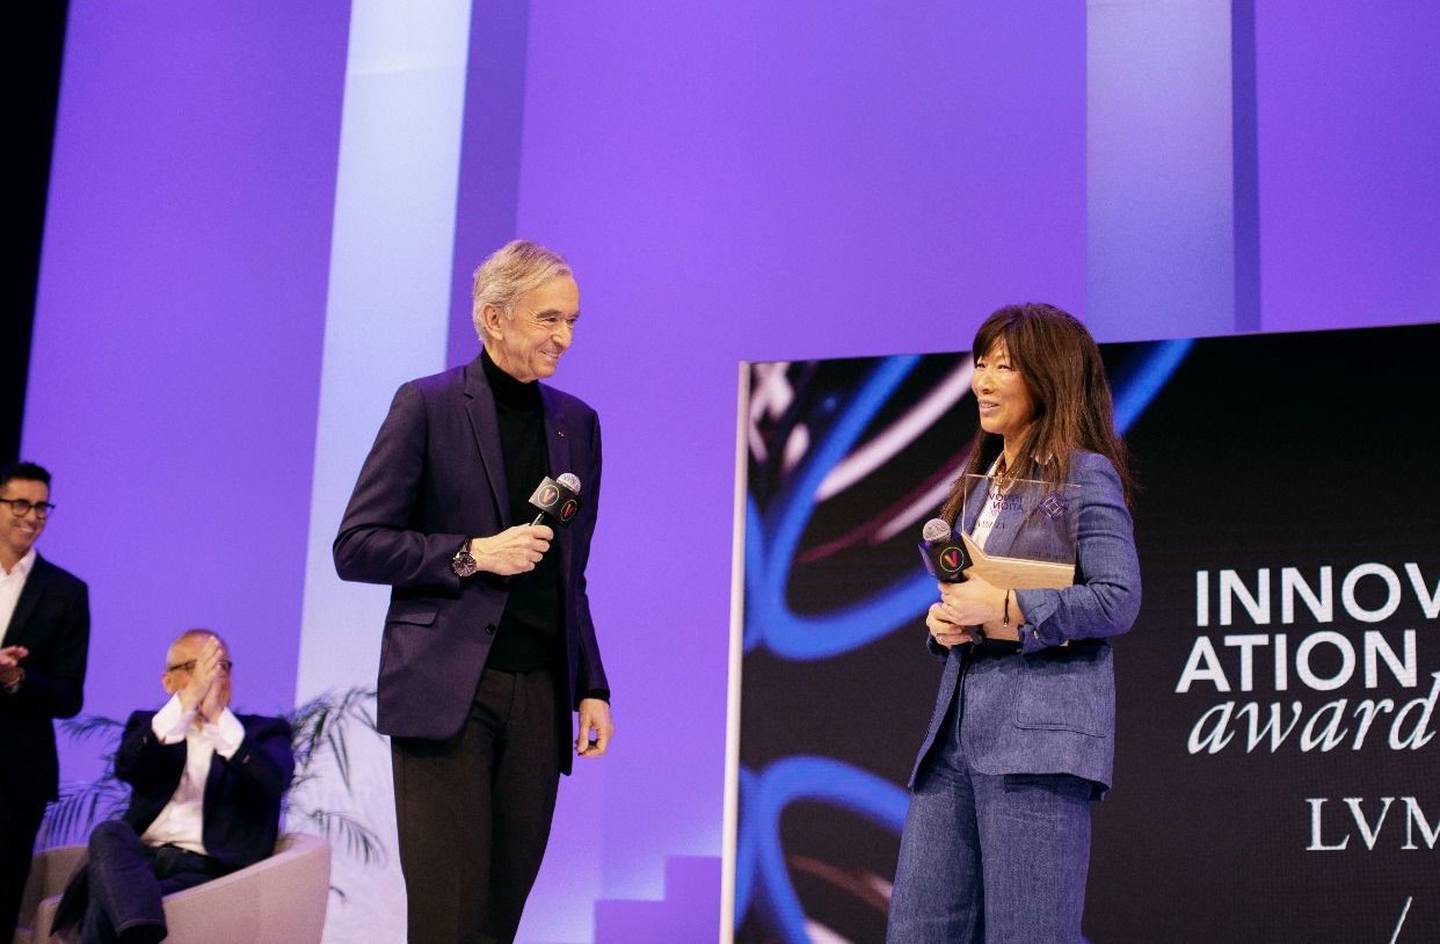 Sojin Lee, founder of the last mile delivery service Toshi, receives an award from LVMH chairman Bernard Arnault in Paris.